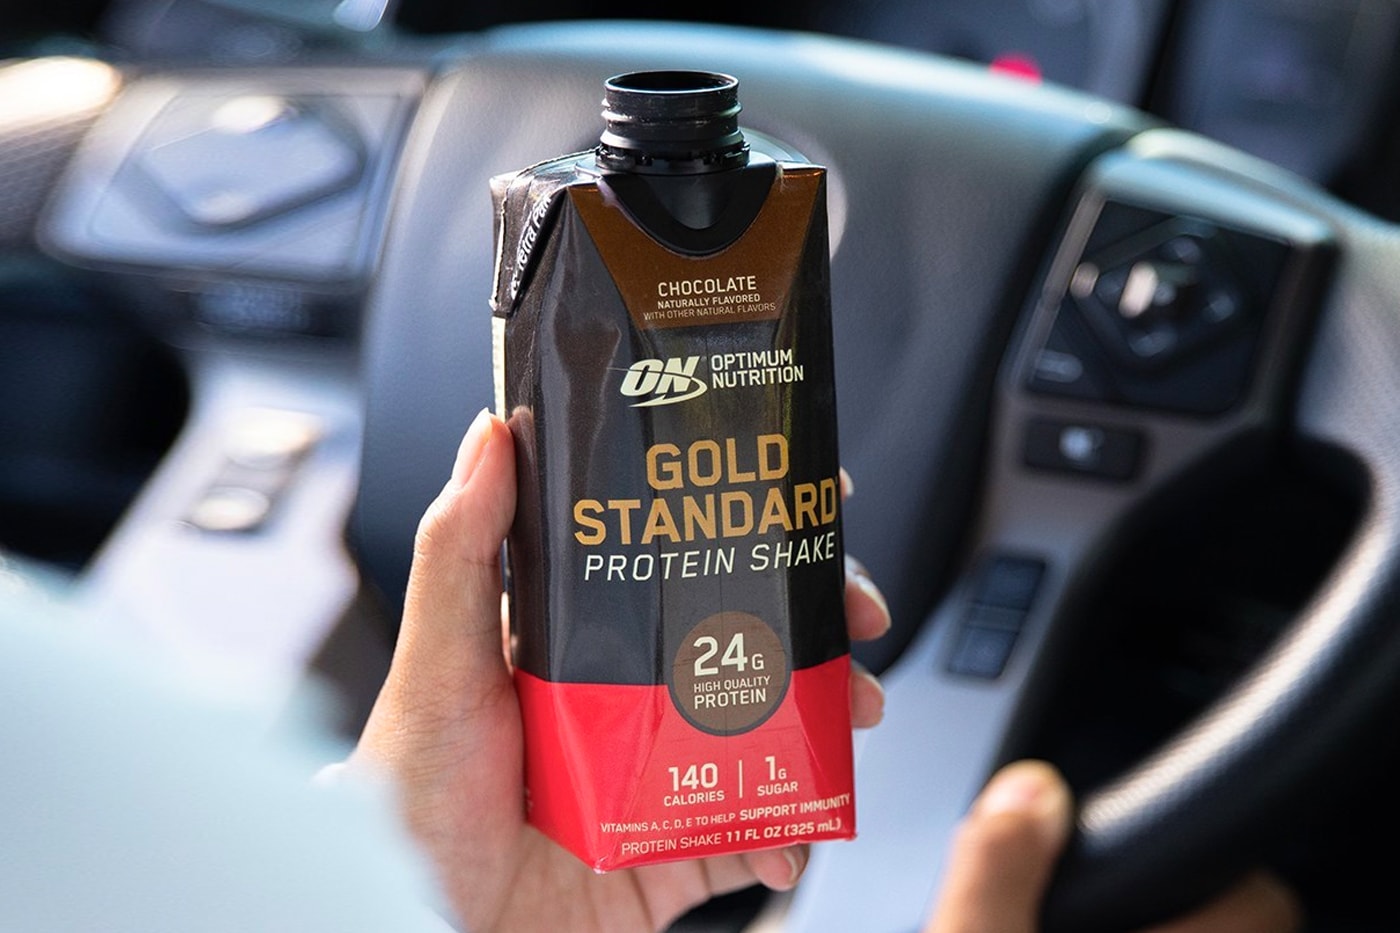 https://image-cdn.hypb.st/https%3A%2F%2Fhypebeast.com%2Fimage%2F2022%2F08%2Foptimum-nutrition-gold-standard-ready-to-drink-protein-shake-release-info-001.jpg?cbr=1&q=90